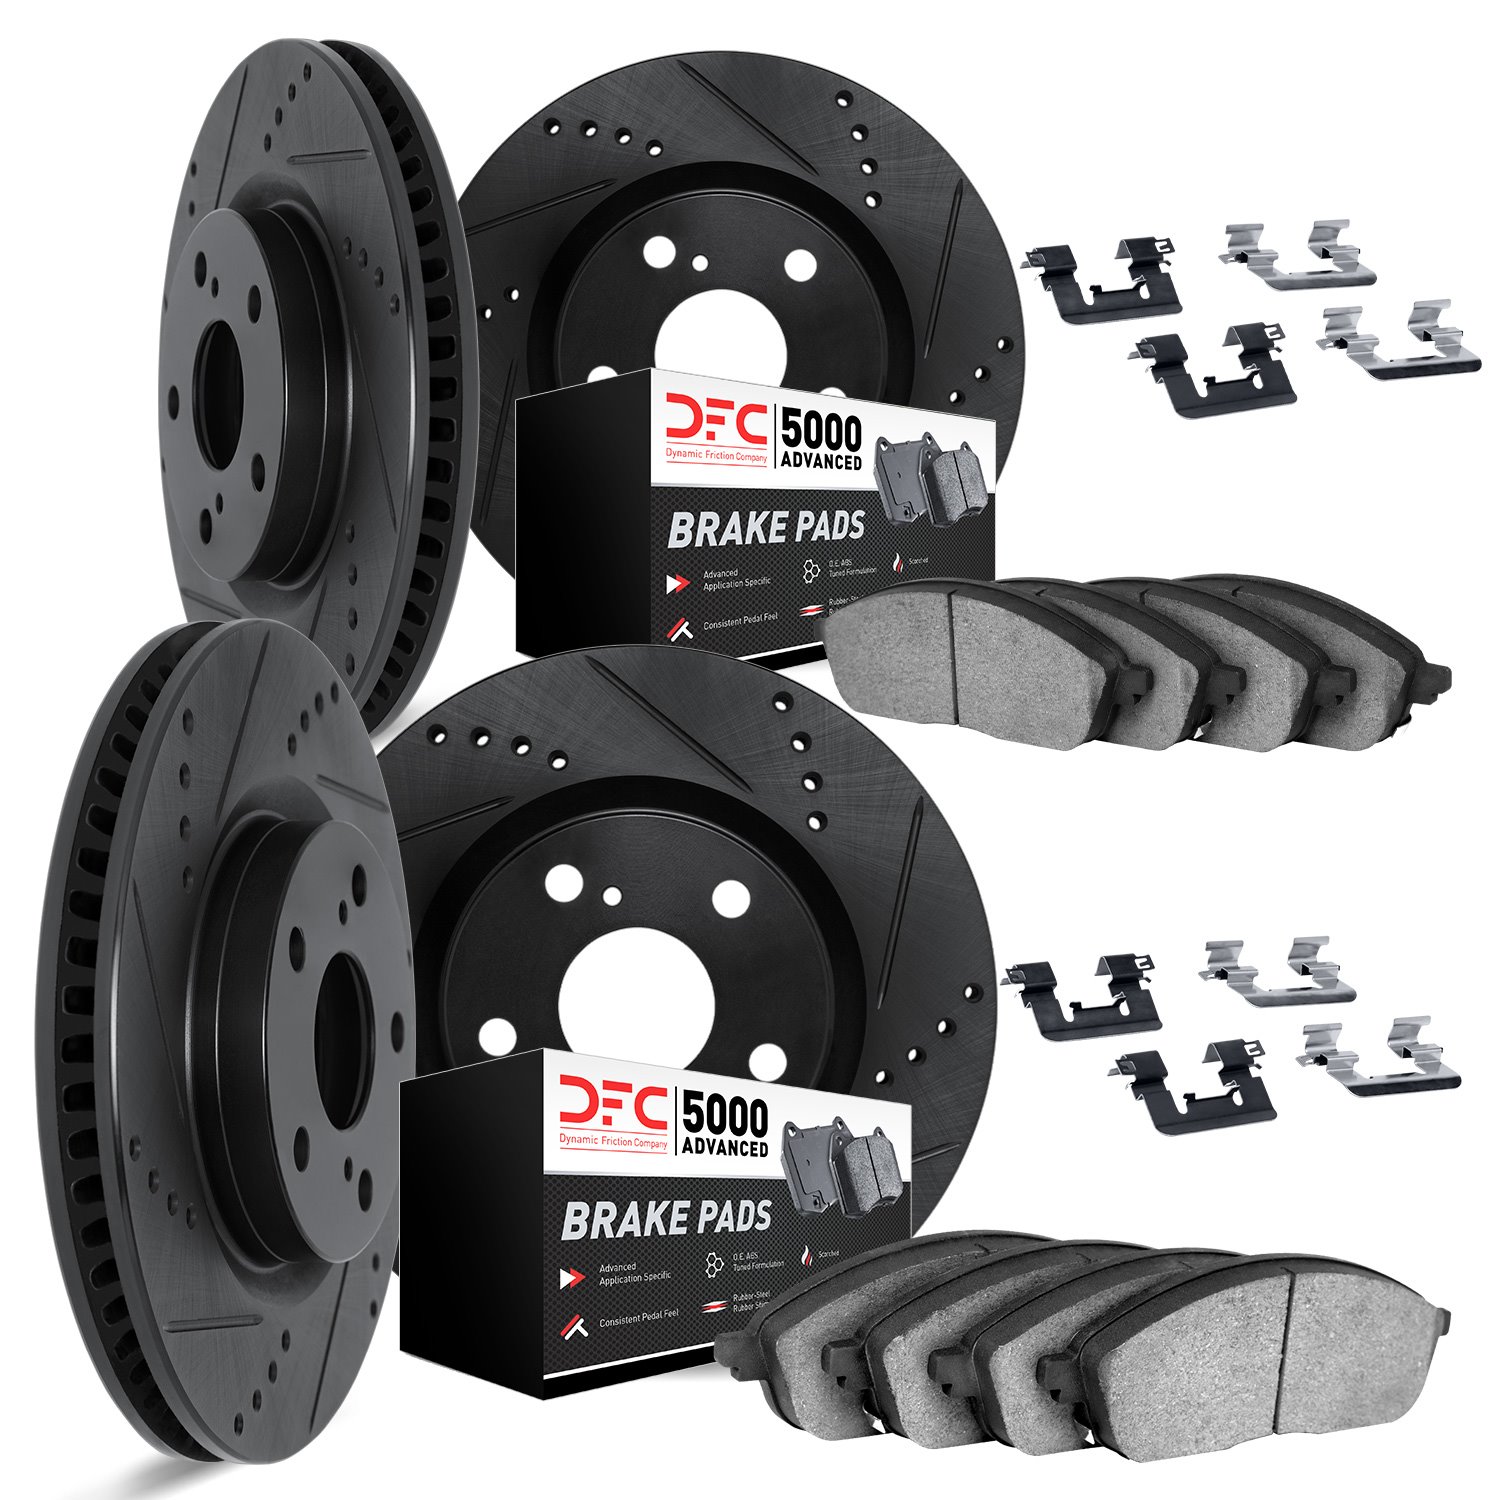 8514-31037 Drilled/Slotted Brake Rotors w/5000 Advanced Brake Pads Kit & Hardware [Black], 2012-2019 BMW, Position: Front and Re